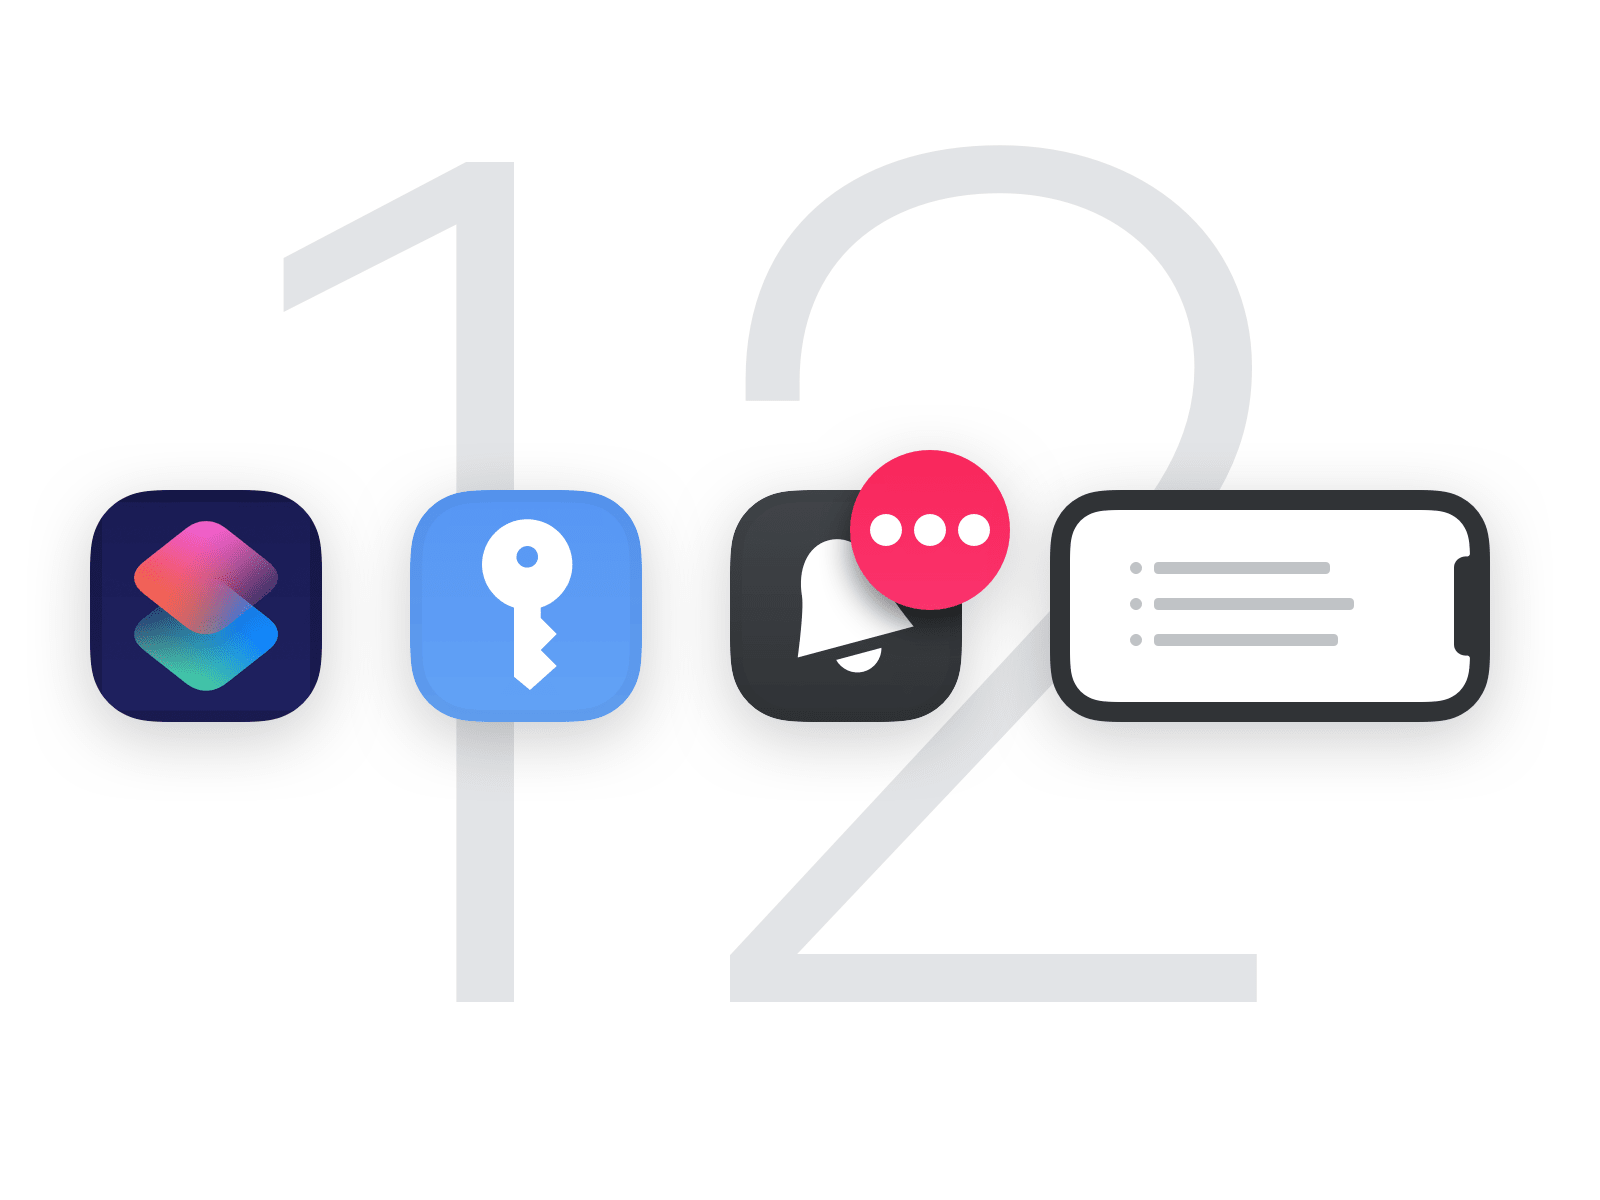 Things 3.7 for iOS 12